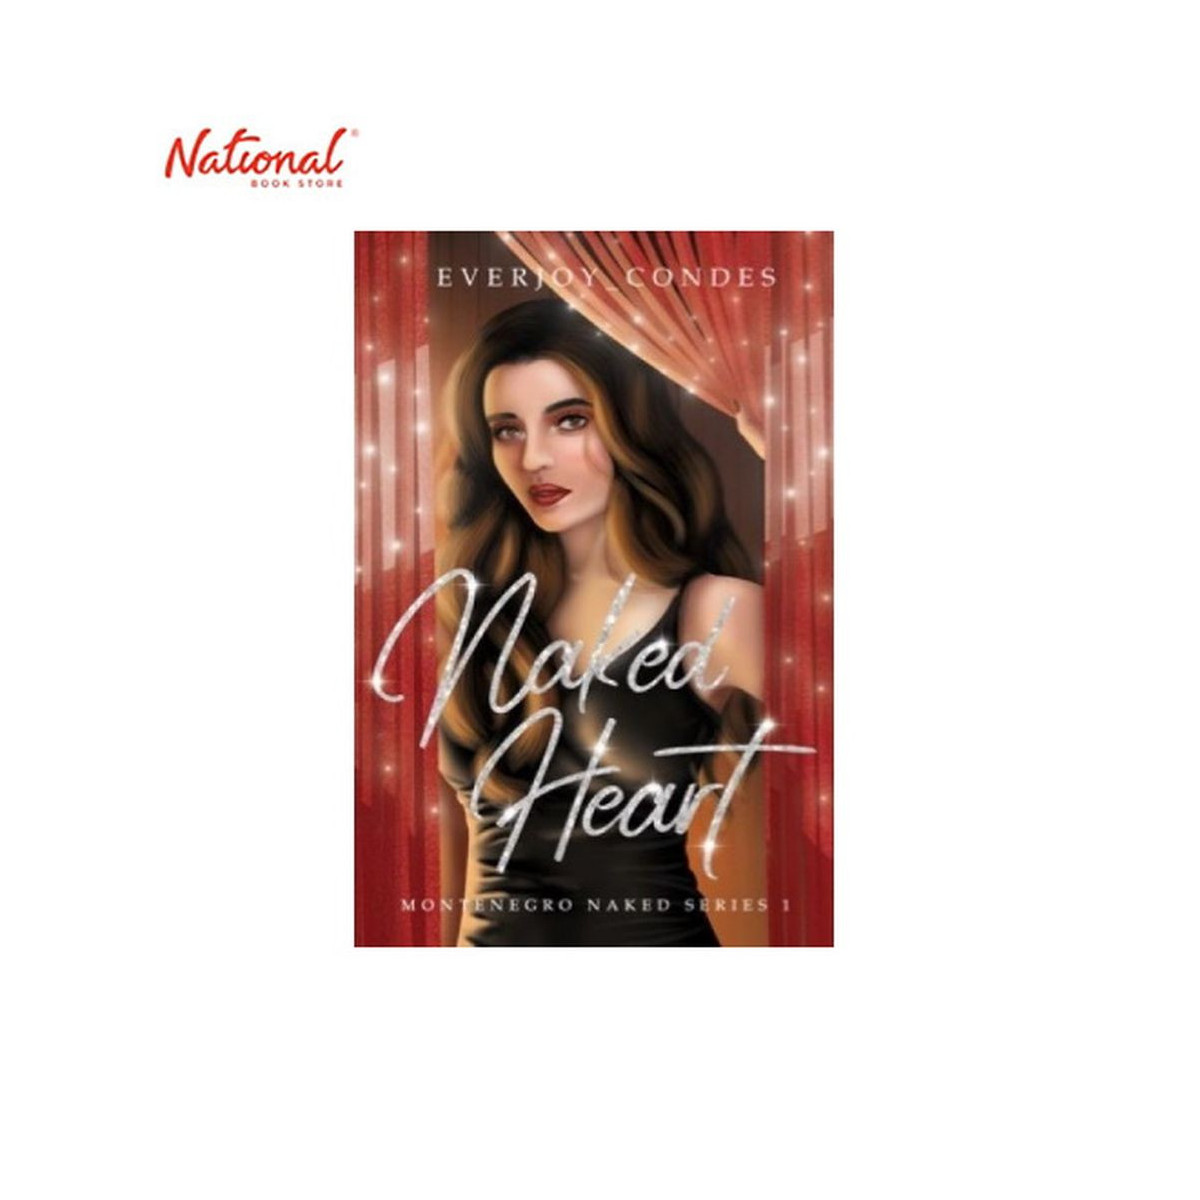 Naked Heart 1 Trade Paperback By Everjoy Condes